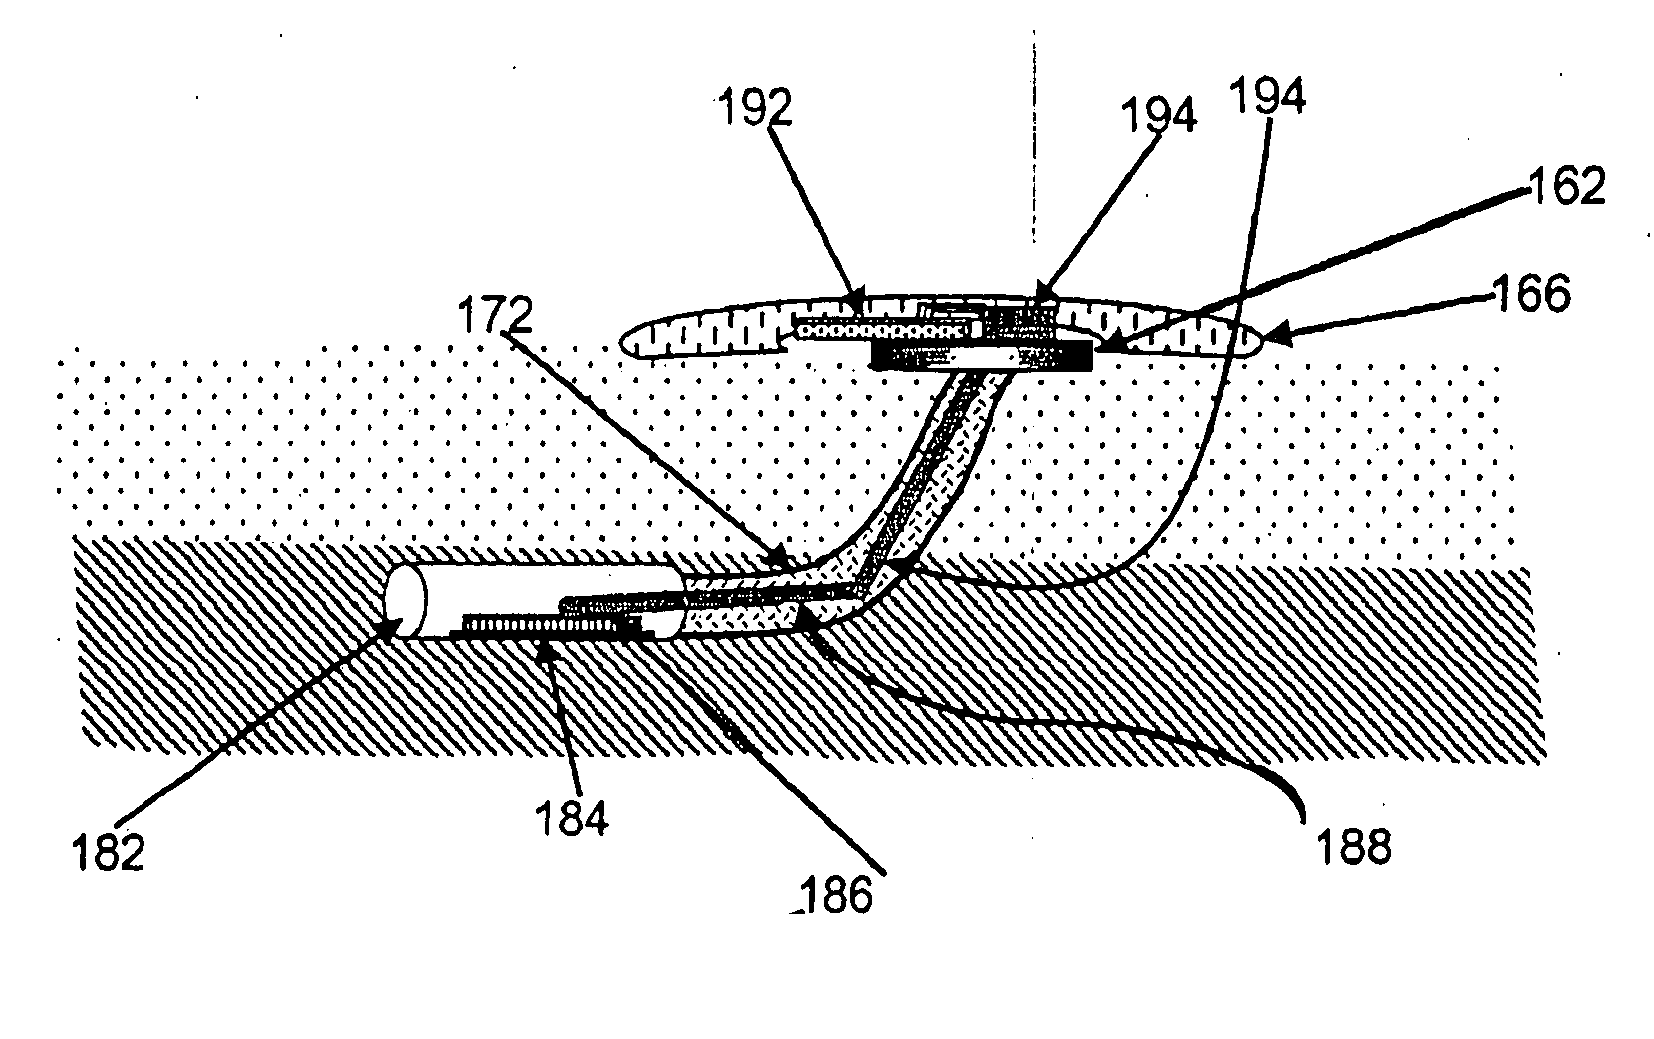 Gateway platform for biological monitoring and delivery of therapeutic compounds